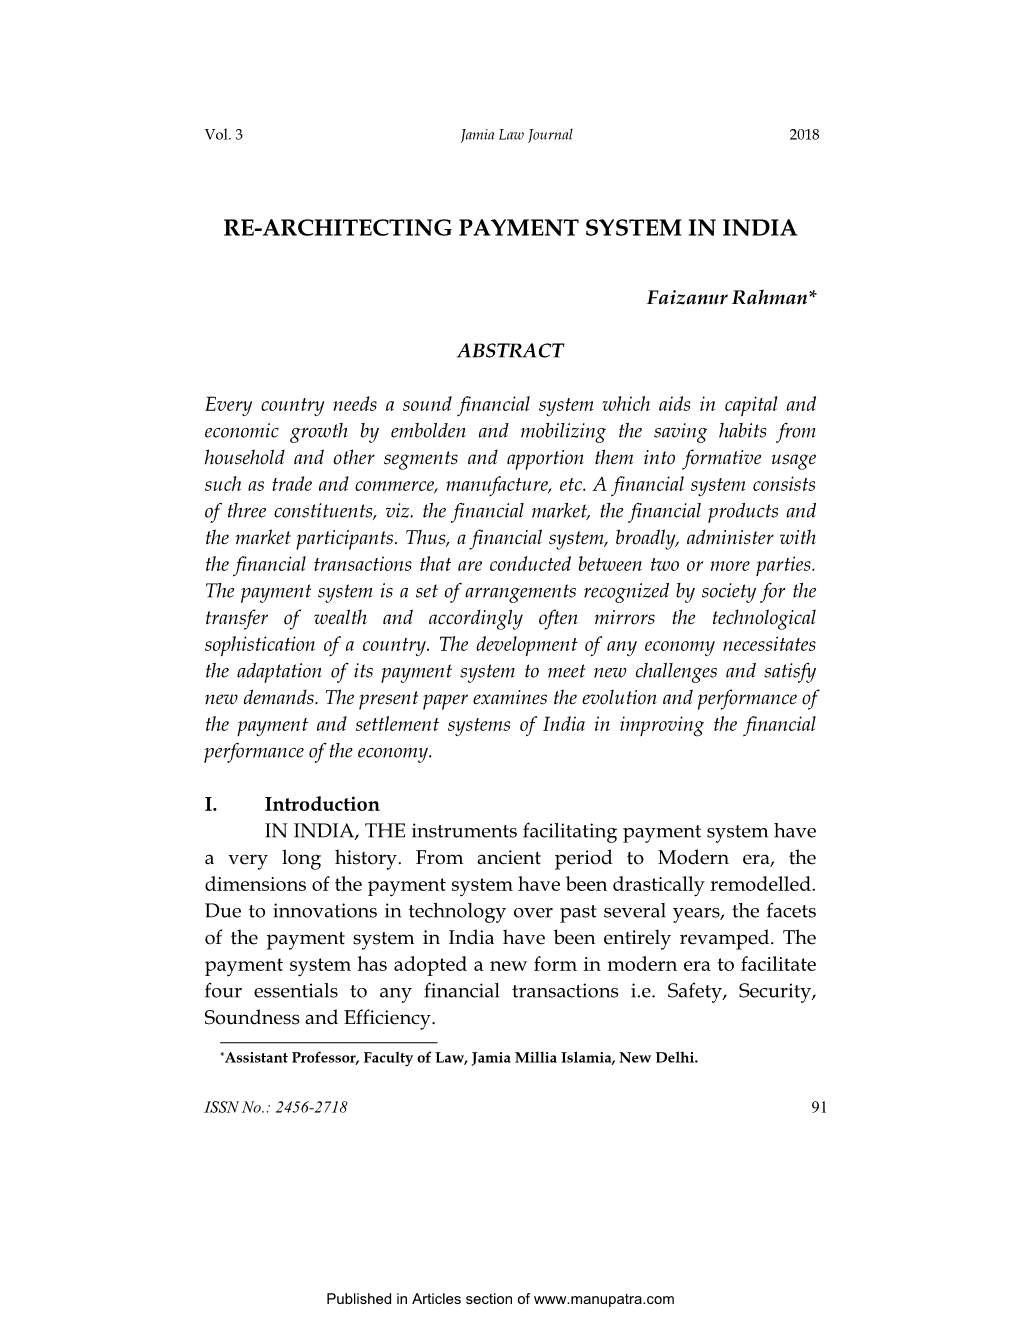 Re-Architecting Payment System in India